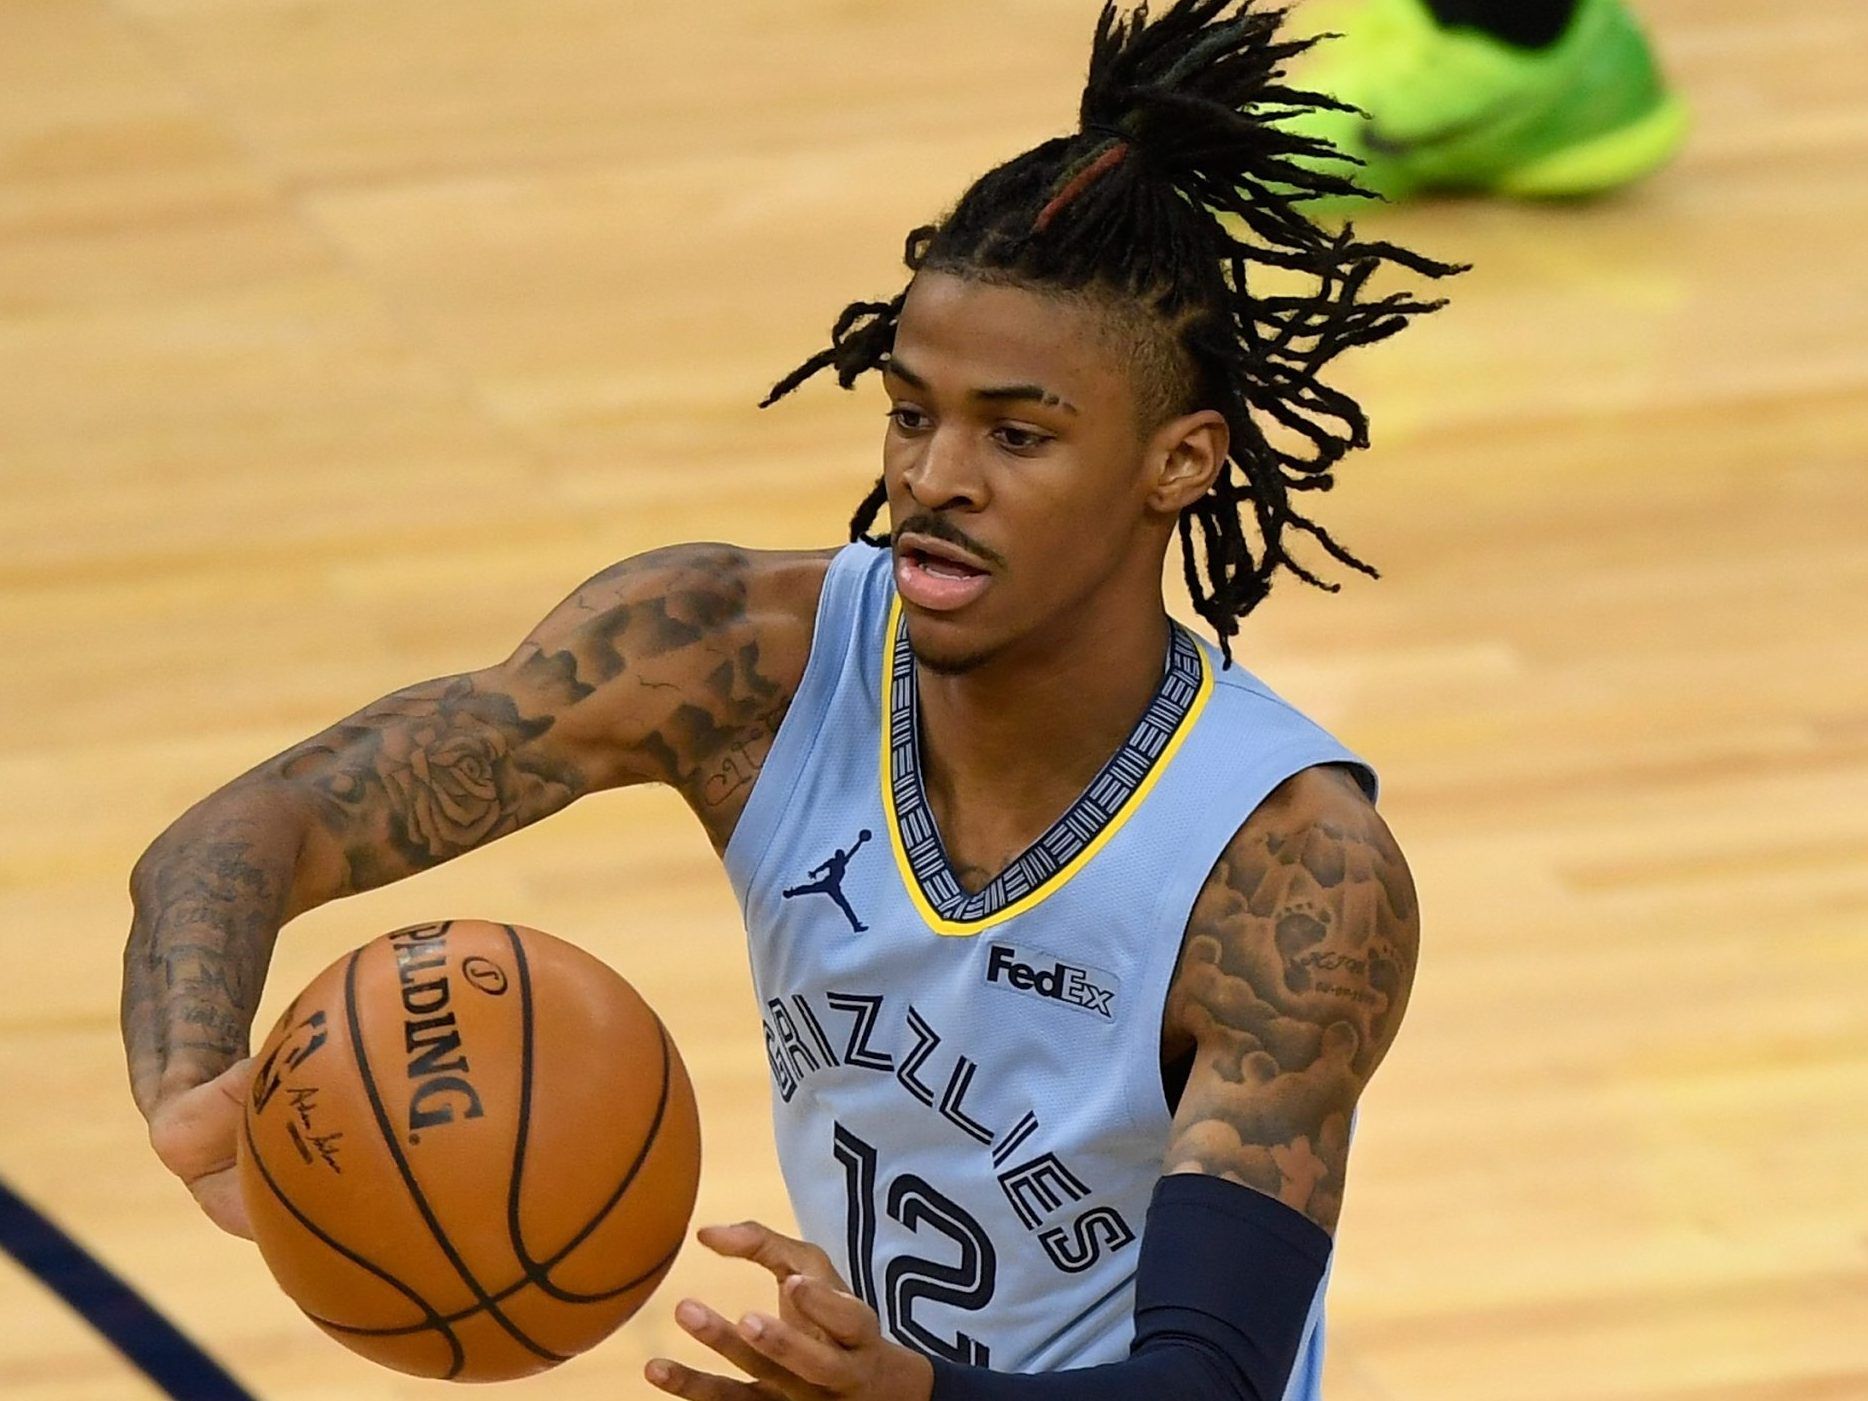 Ja Morant Toys With Fake Gun Day After May Incident In New Video